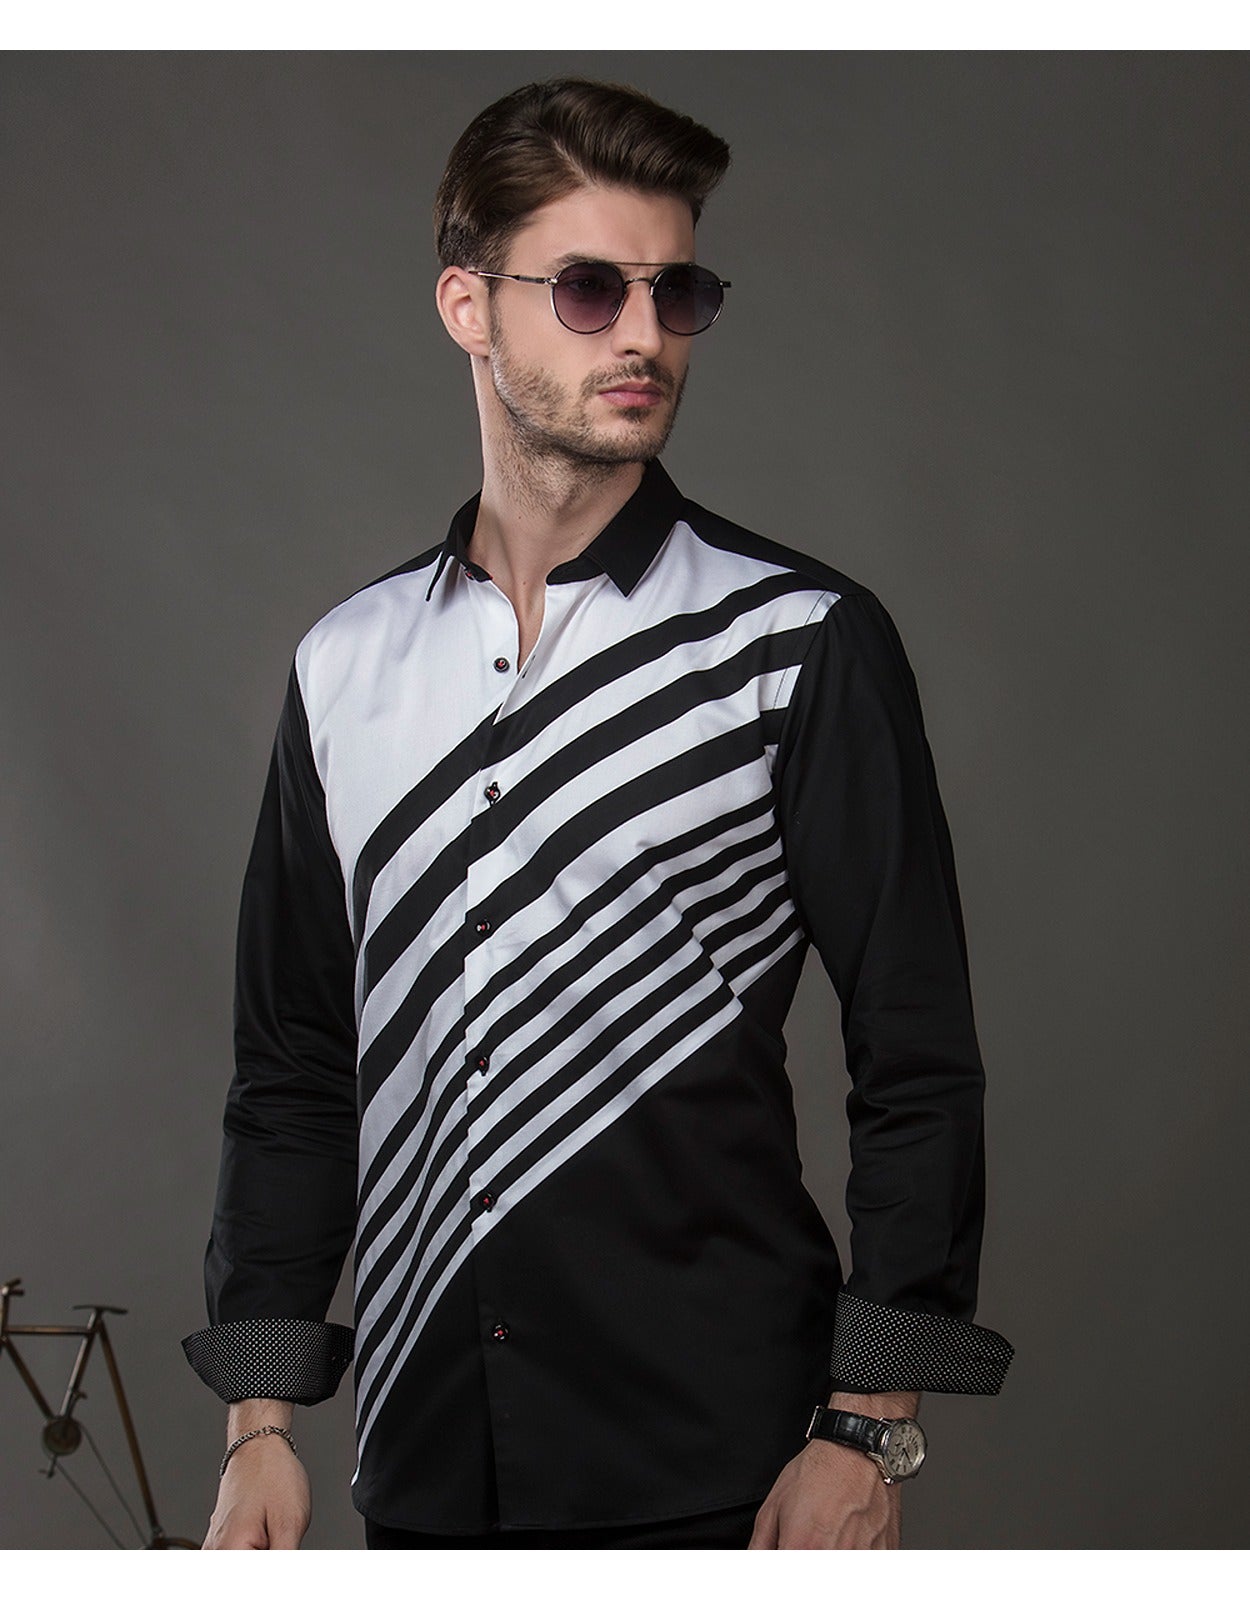 BLACK AND WHITE STRIPPED SHIRT